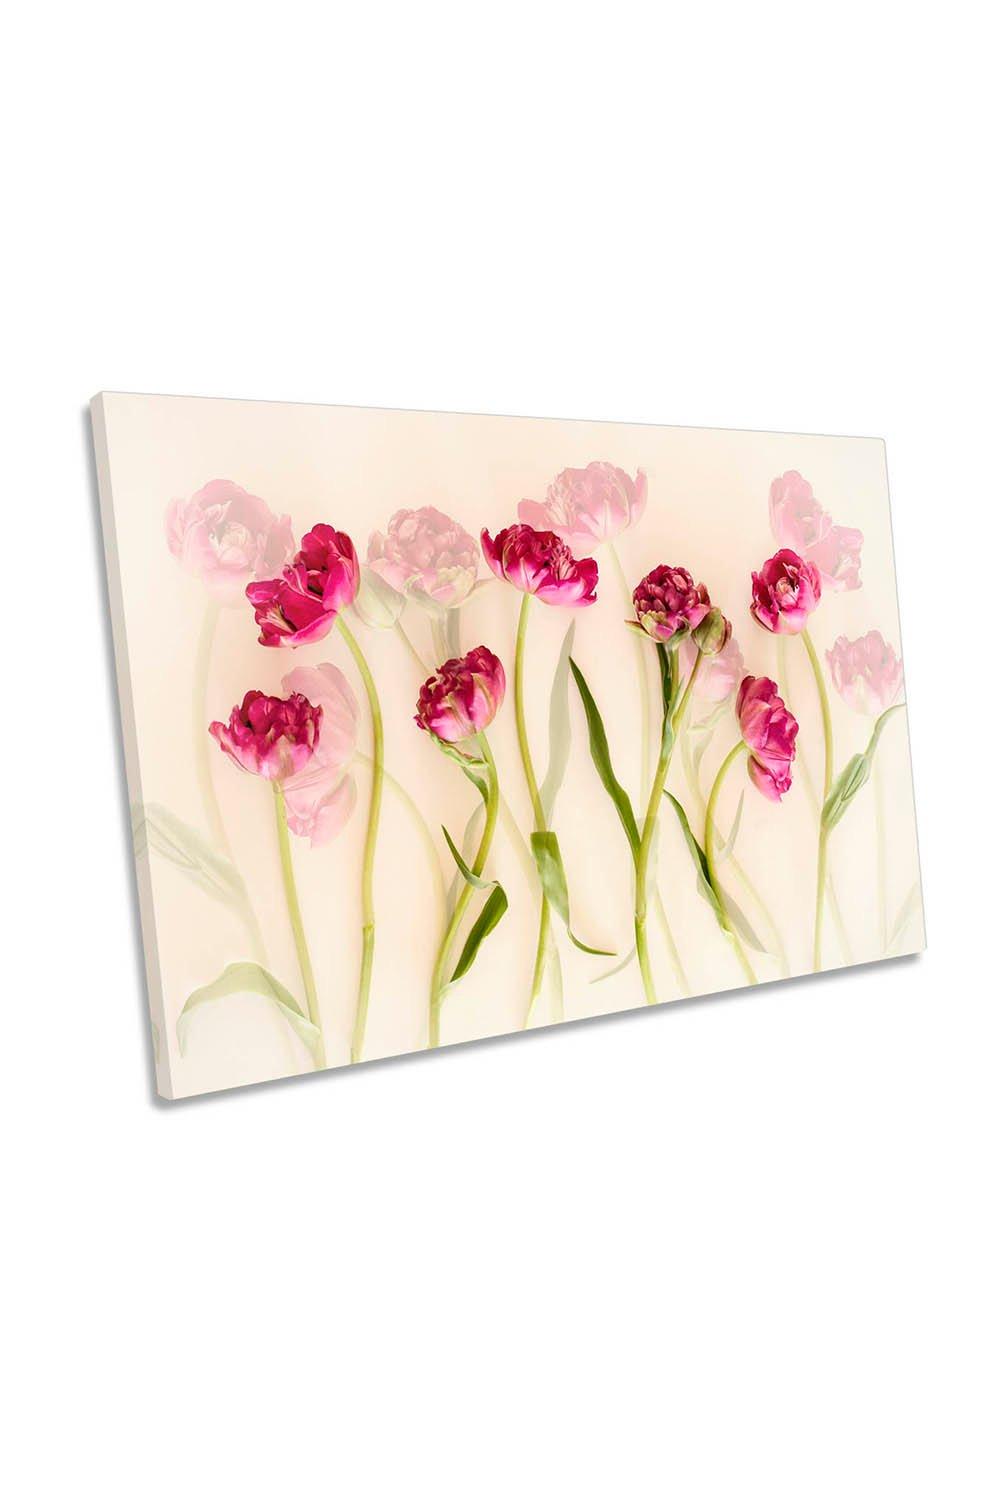 Pink Tulips Flowers Floral Canvas Wall Art Picture Print